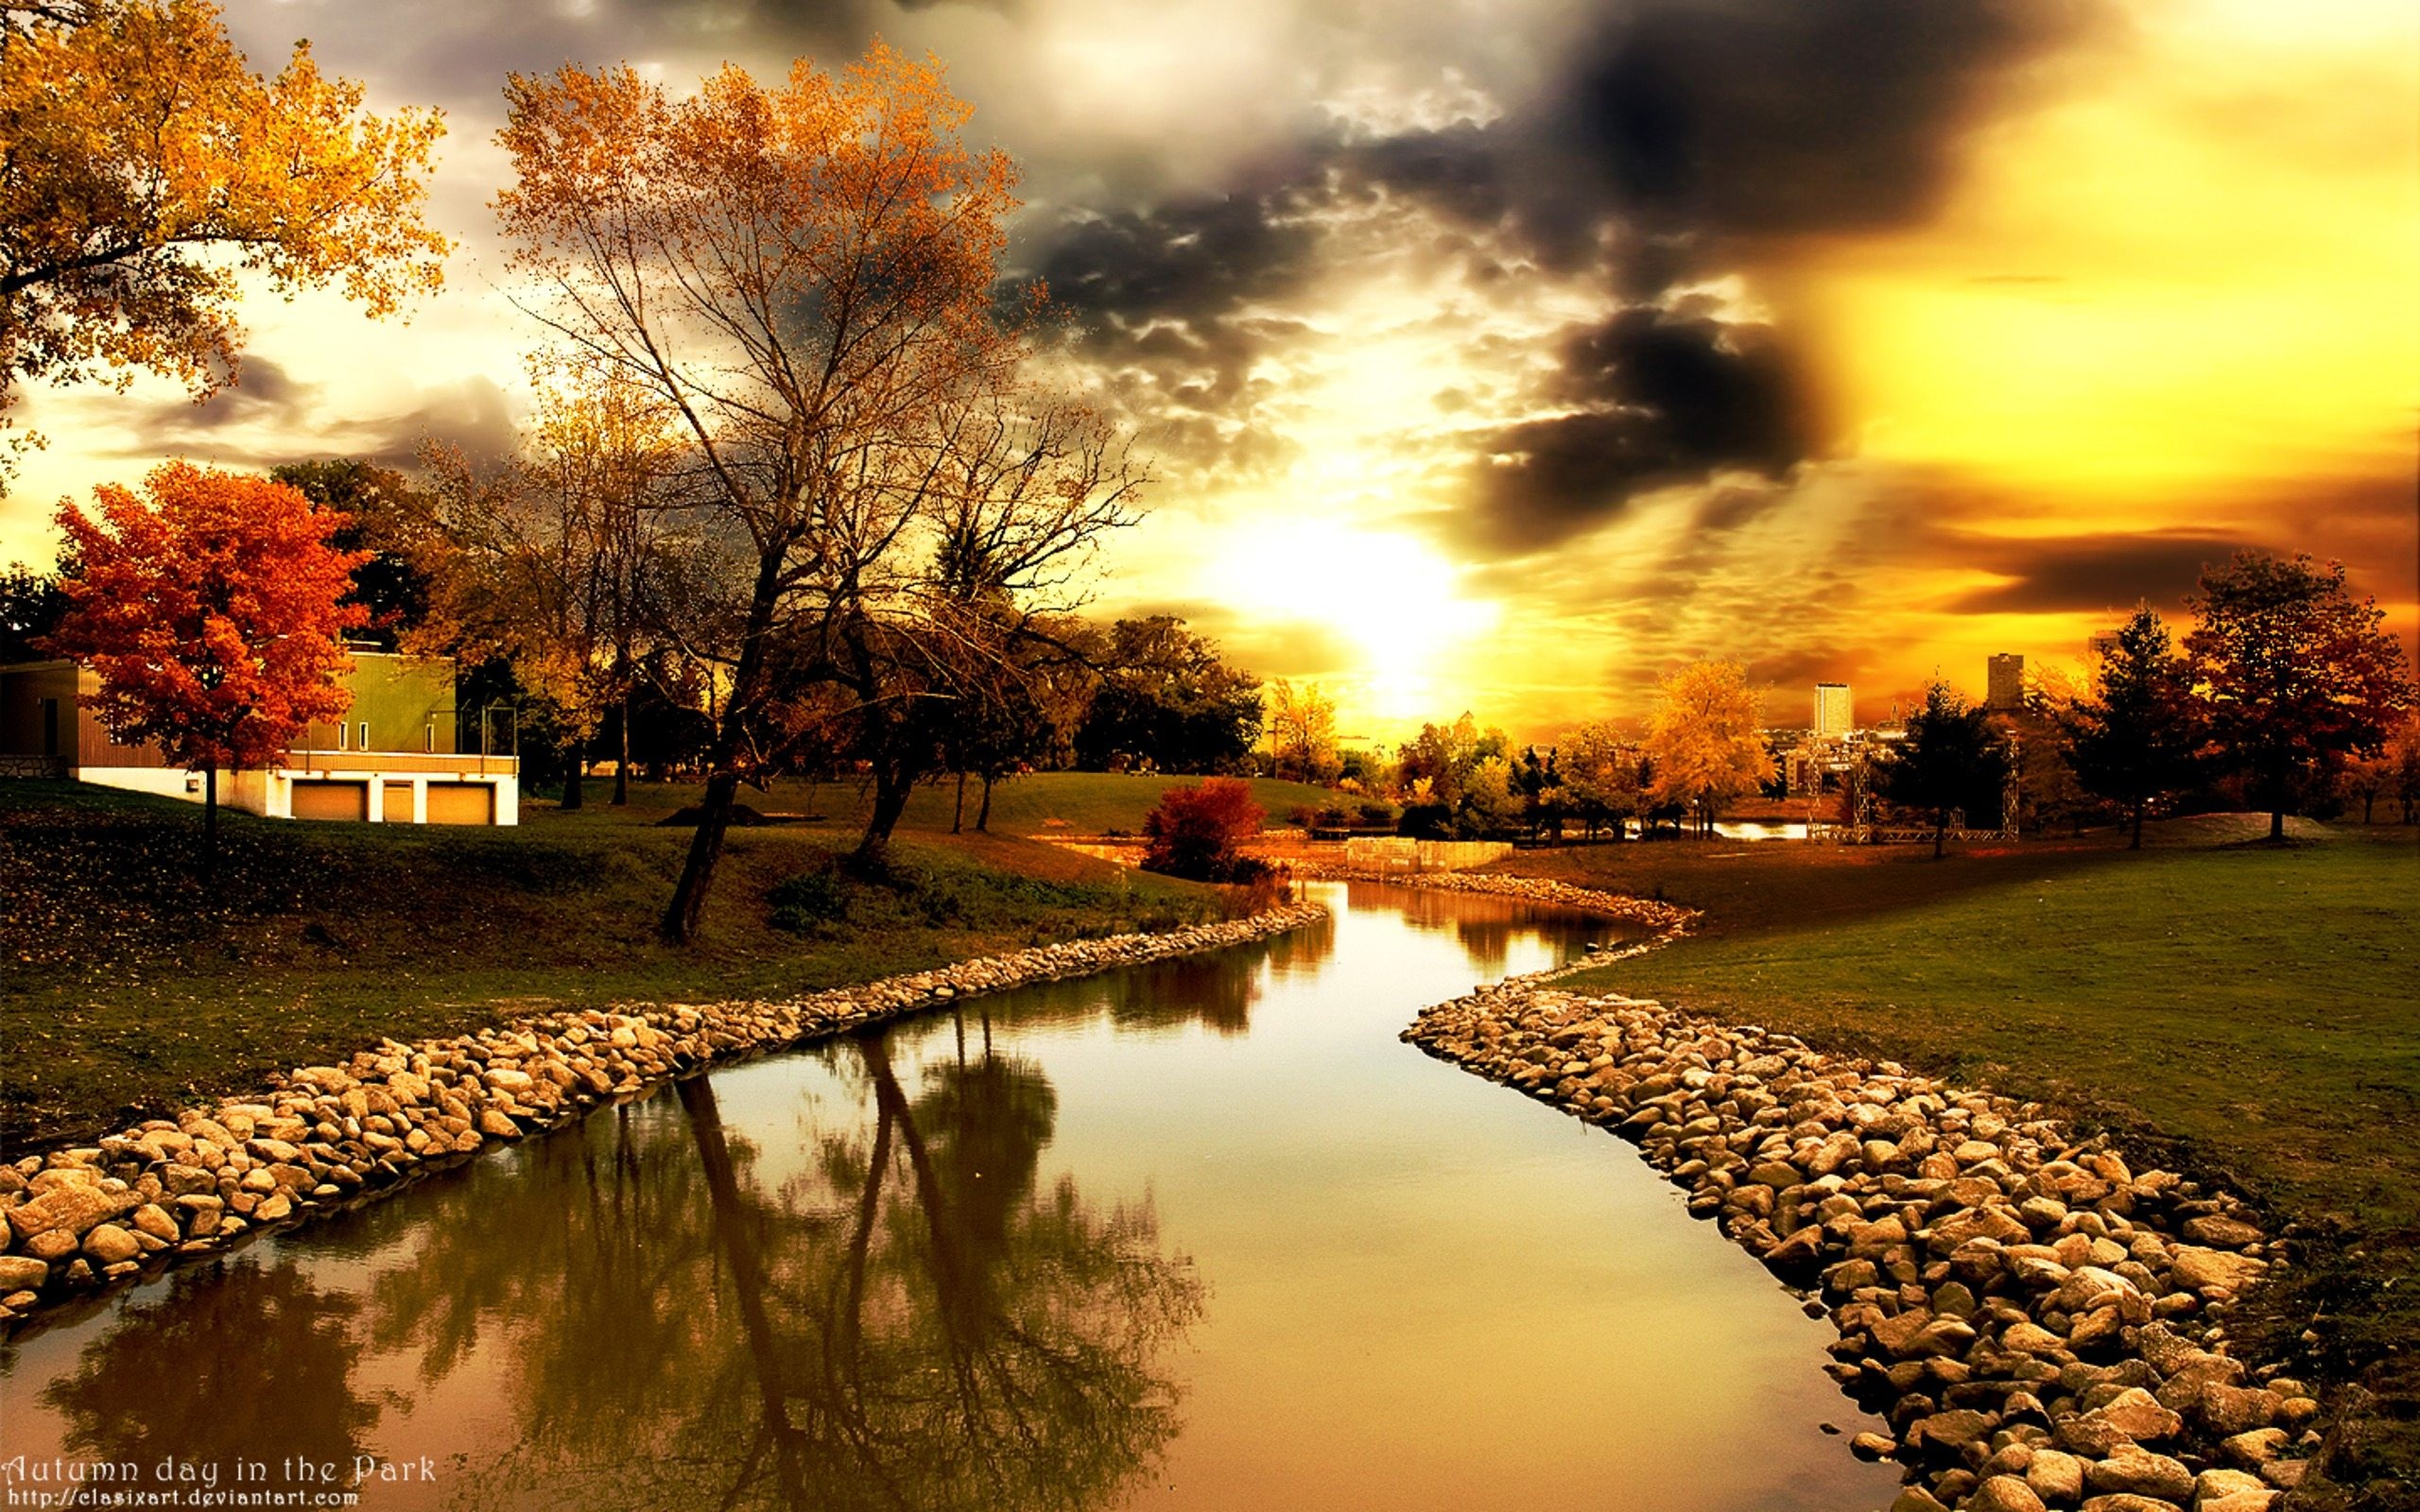 Wallpaper, 2560x1600 px, autumn, clouds, day, landscapes, nature, rocks, skyscapes, sunlight, sunset, trees 2560x1600